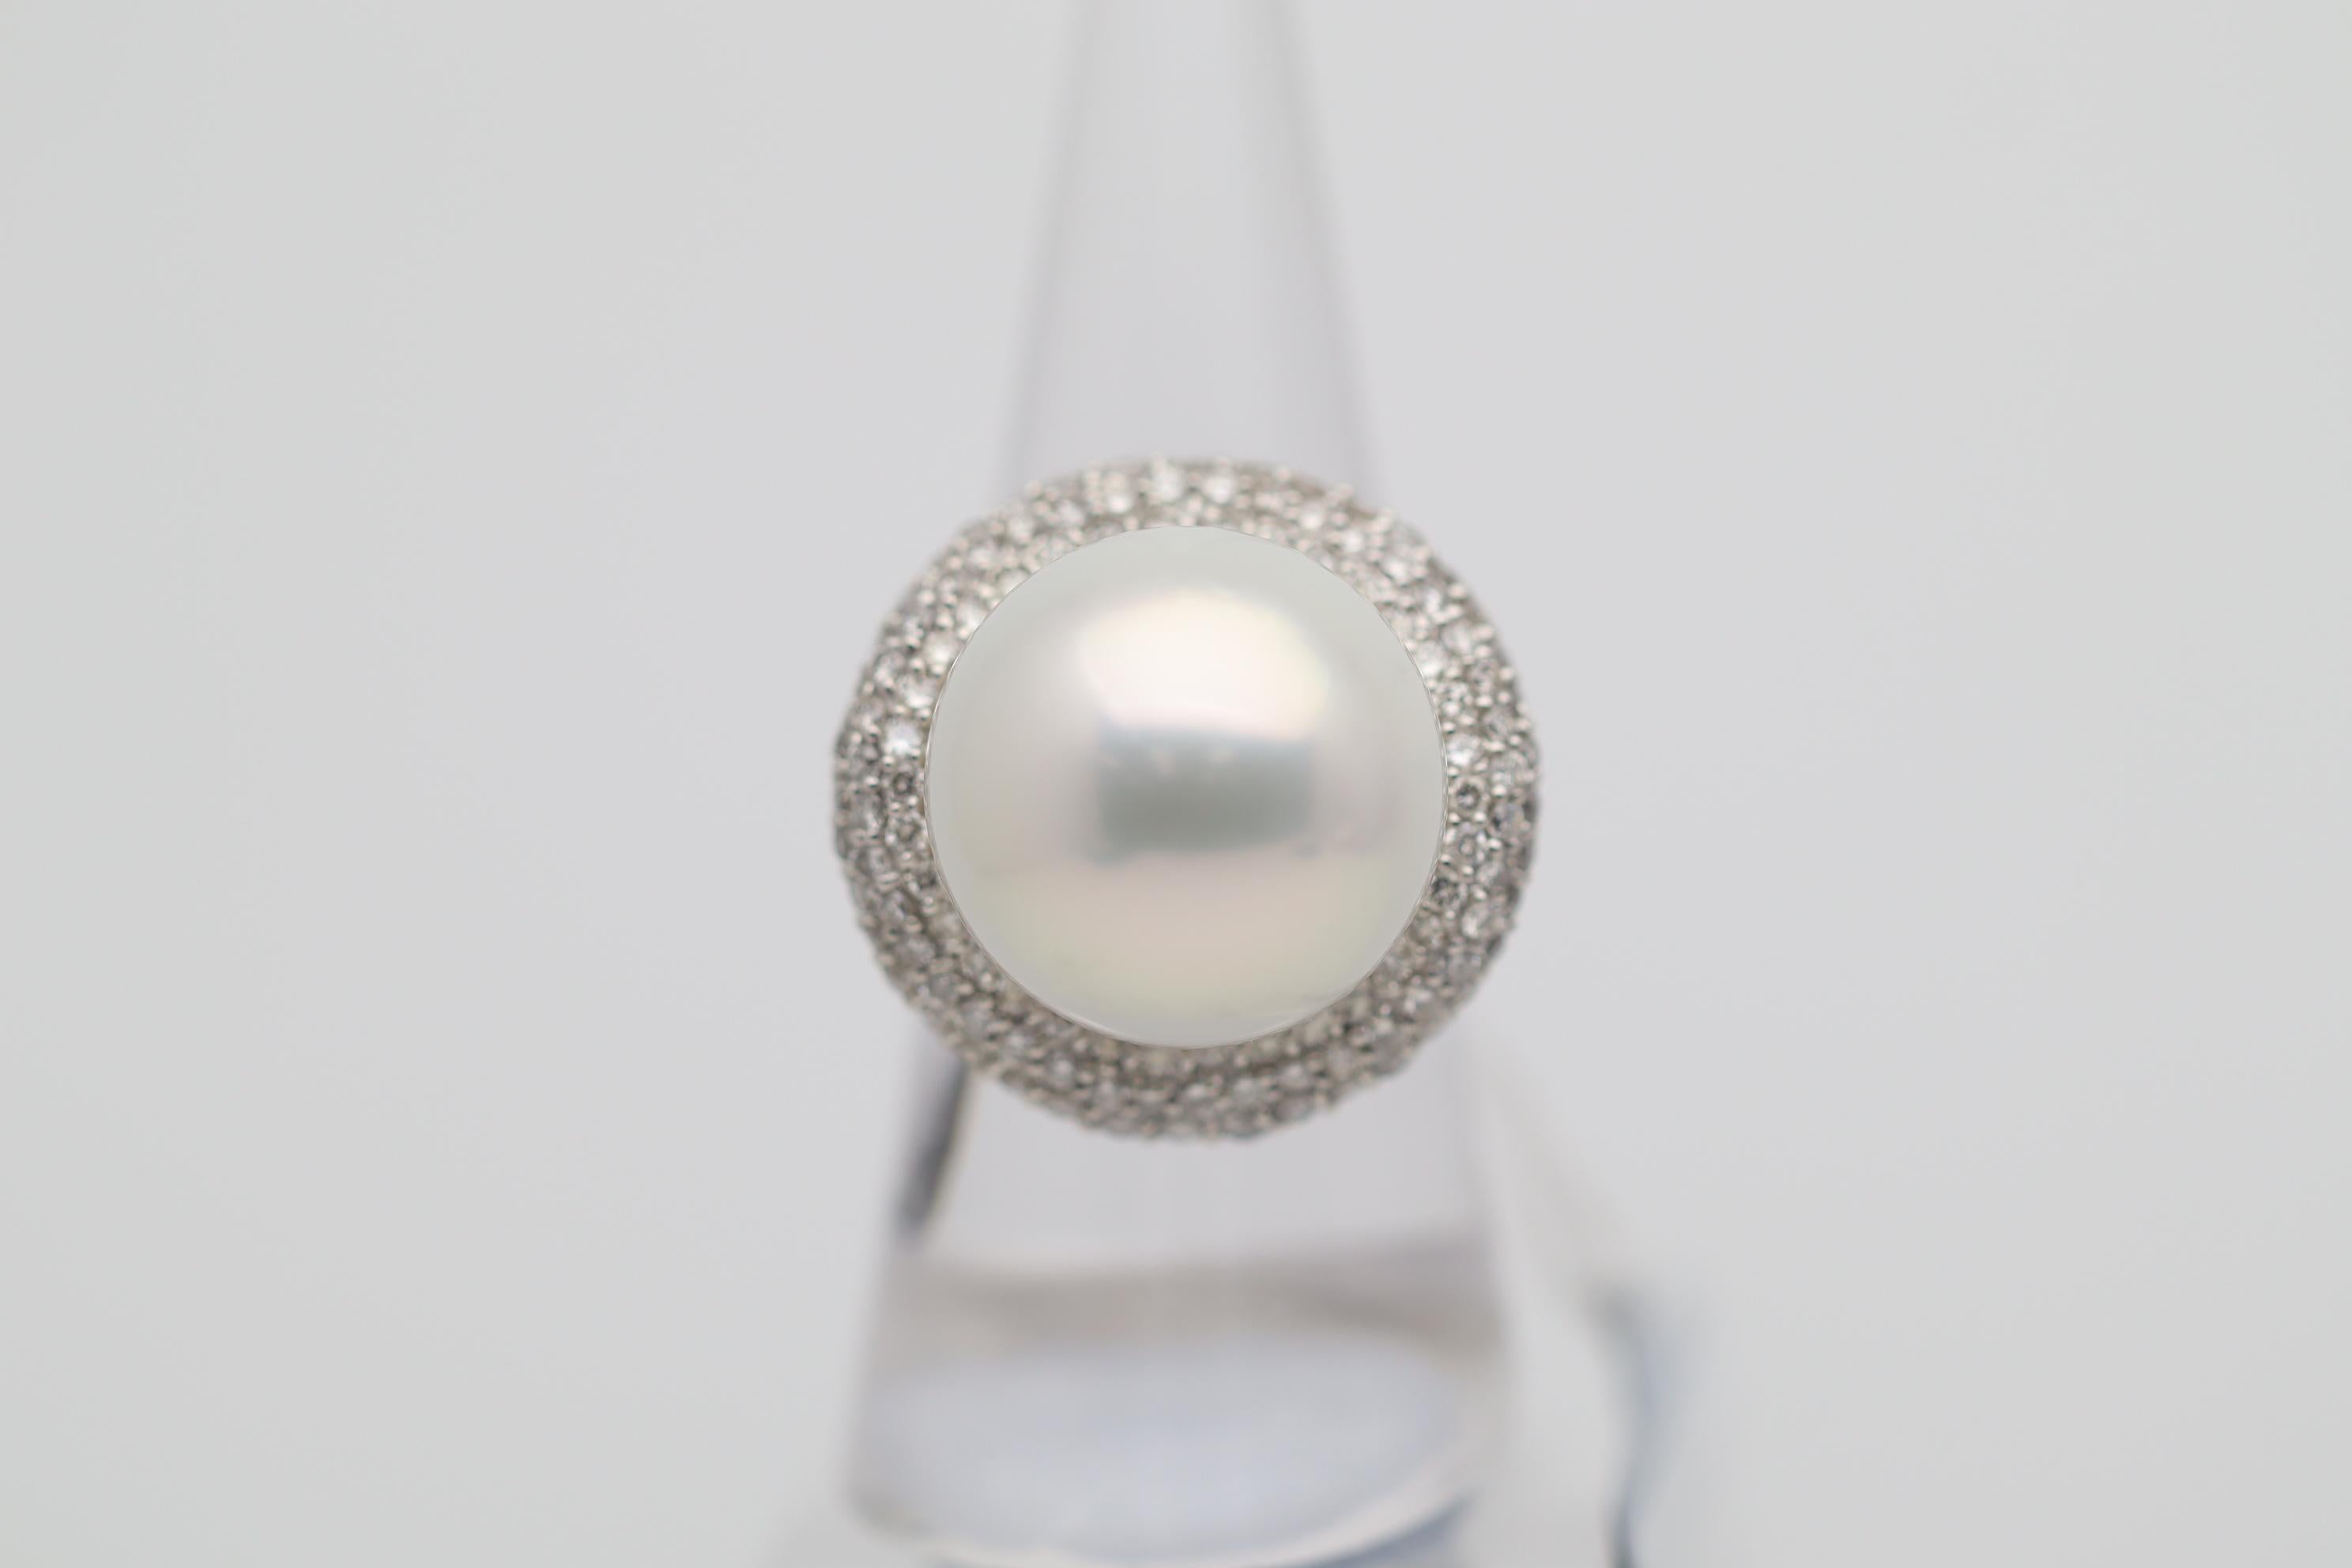 A superb South Sea cultured pearl measuring an astonishing 17.2 millimeters takes center stage! This is one of the largest pearls we have in our collection and its also one of our finest in terms of quality. It is perfectly rounded, has excellent